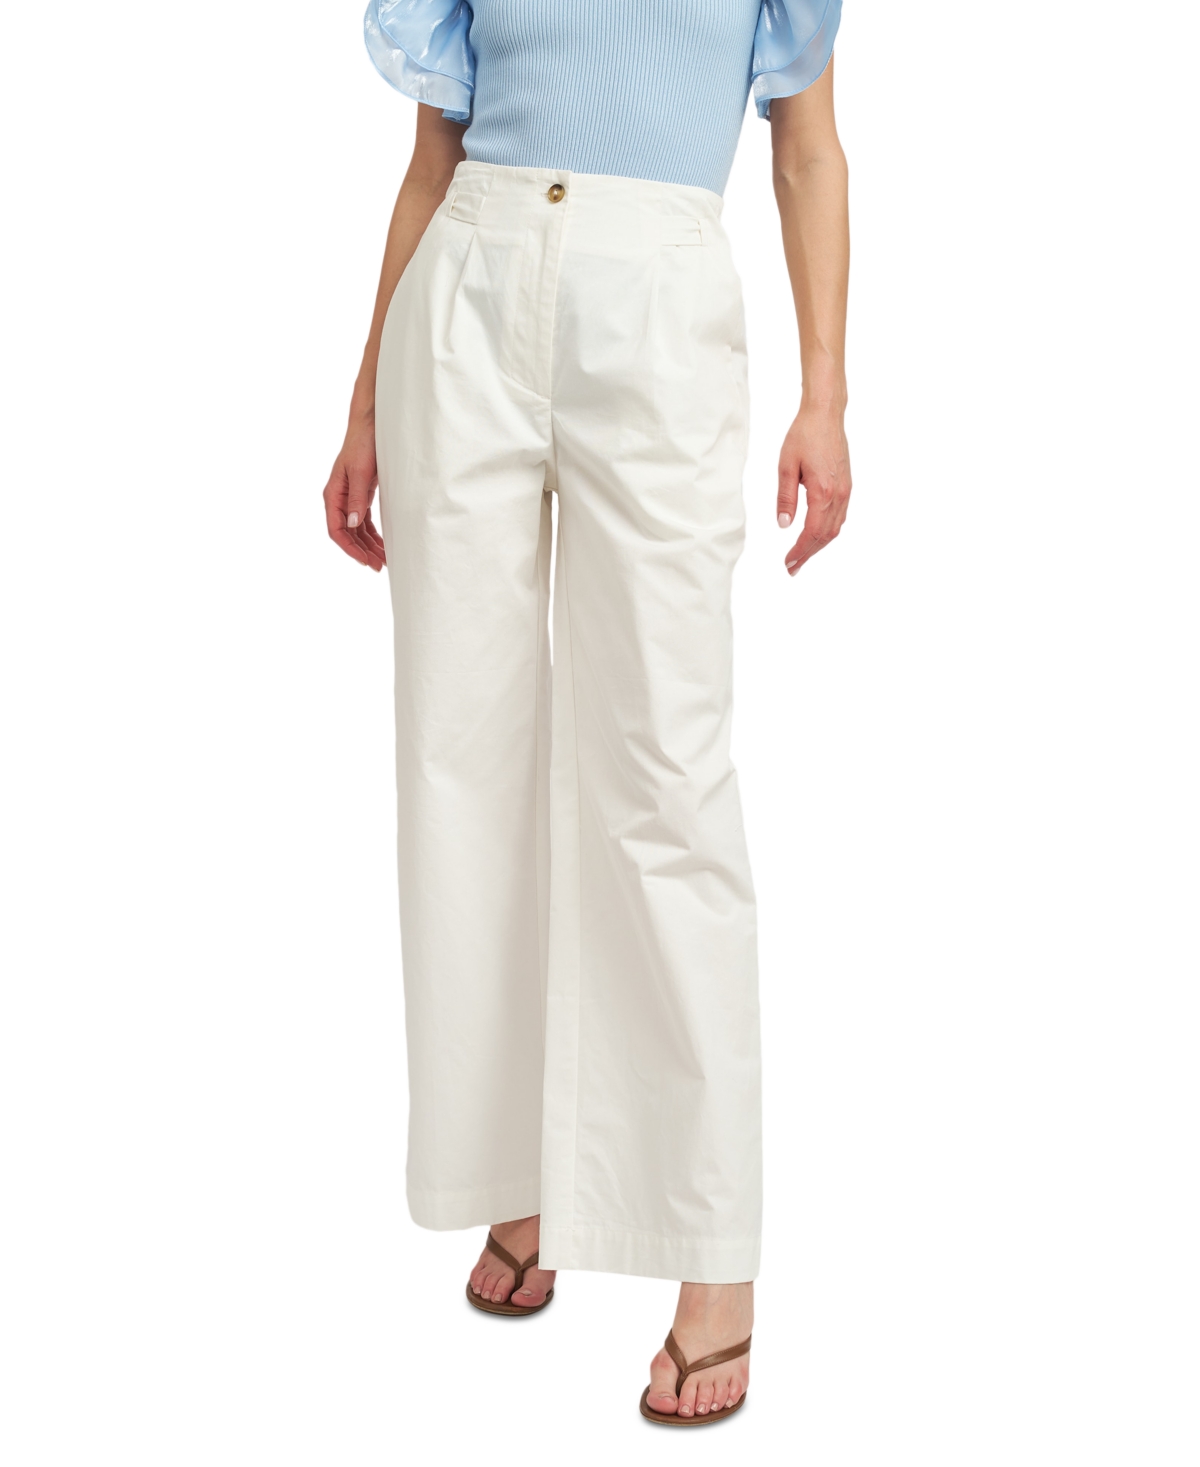 Women's Abby Cotton Bow-Back Pants - Off White